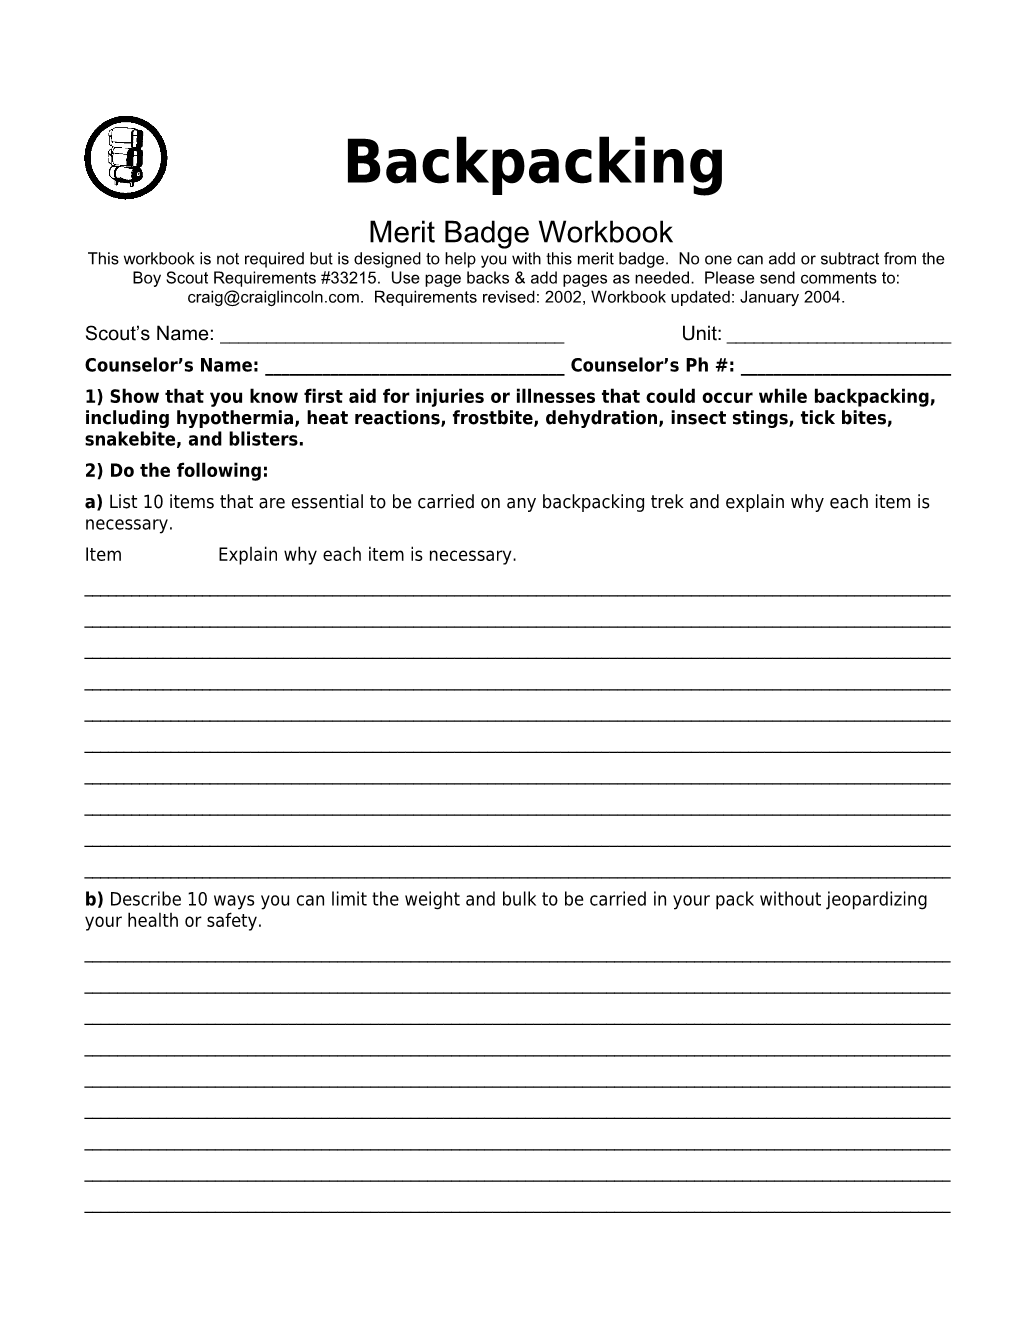 Backpacking P. 1 Merit Badge Workbookscout's Name: ______